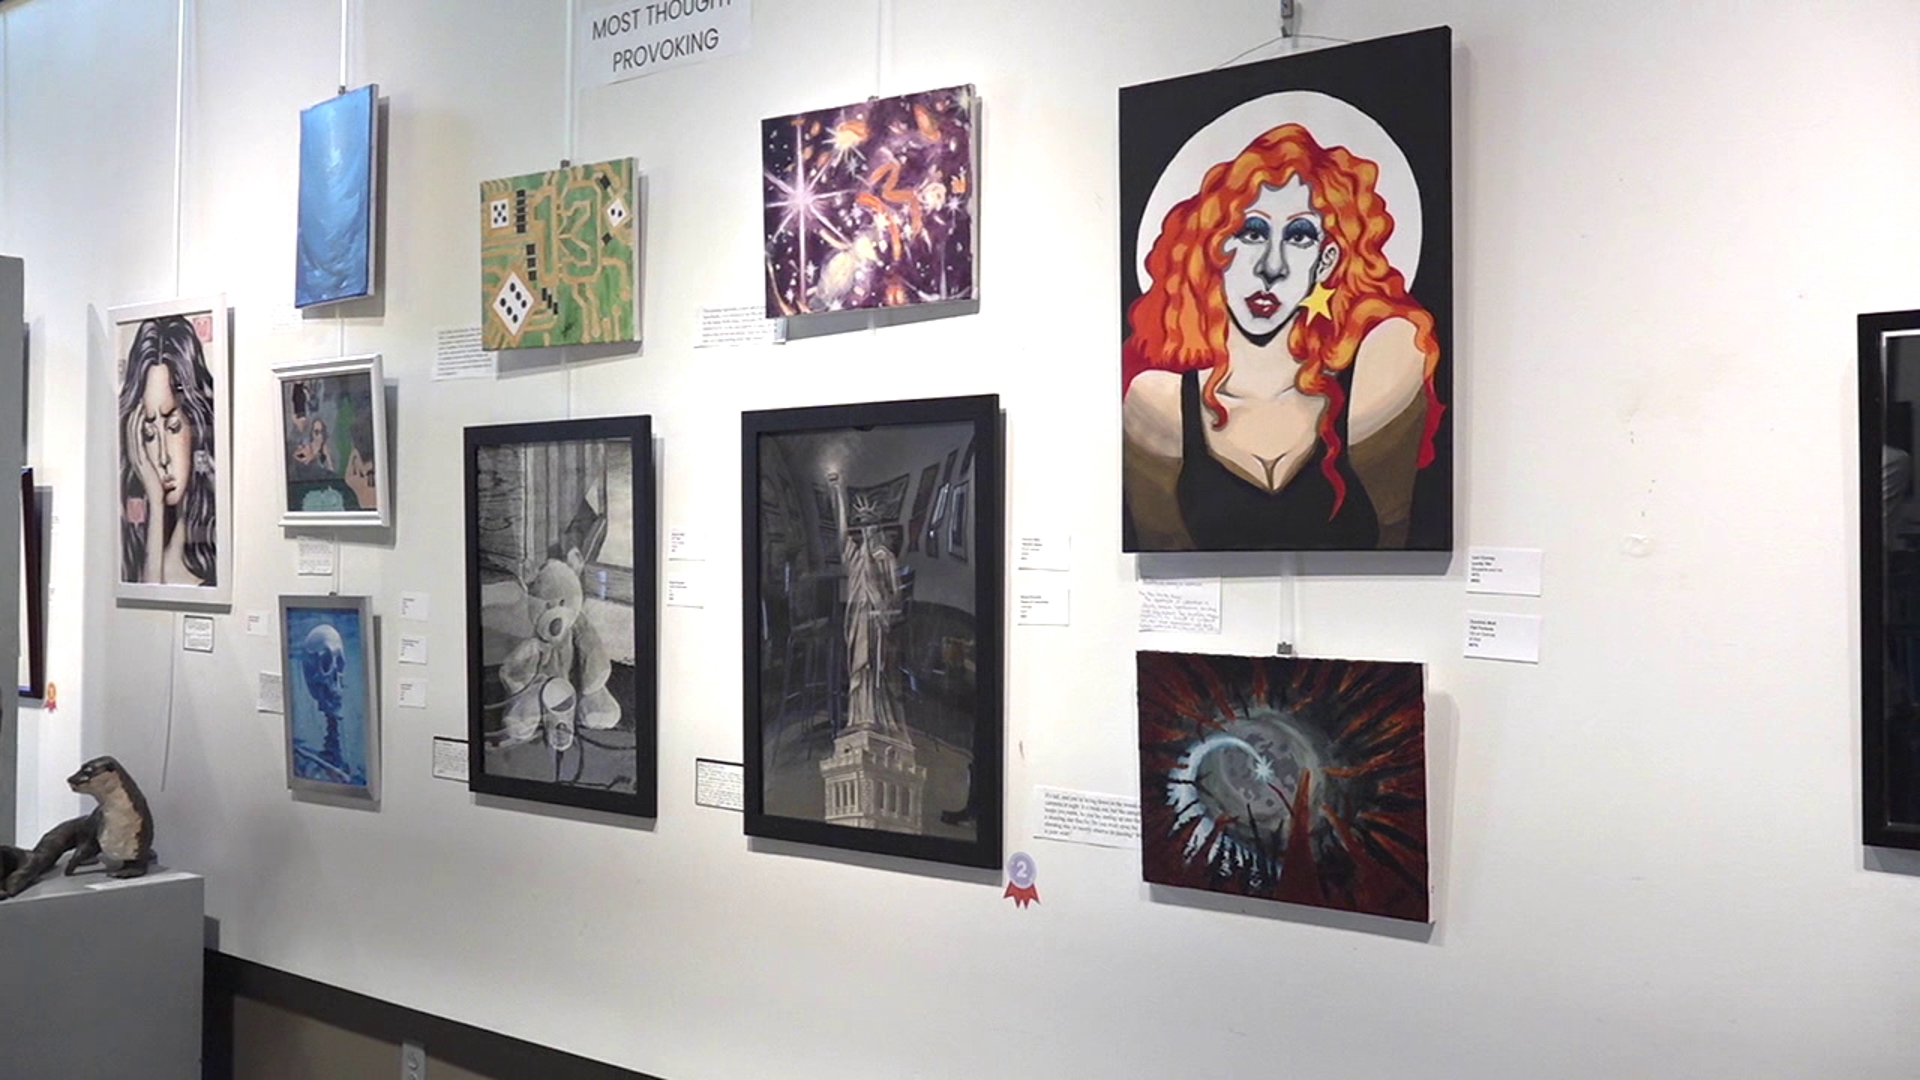 The event celebrates young artists and all types of art and is displayed until June 30.